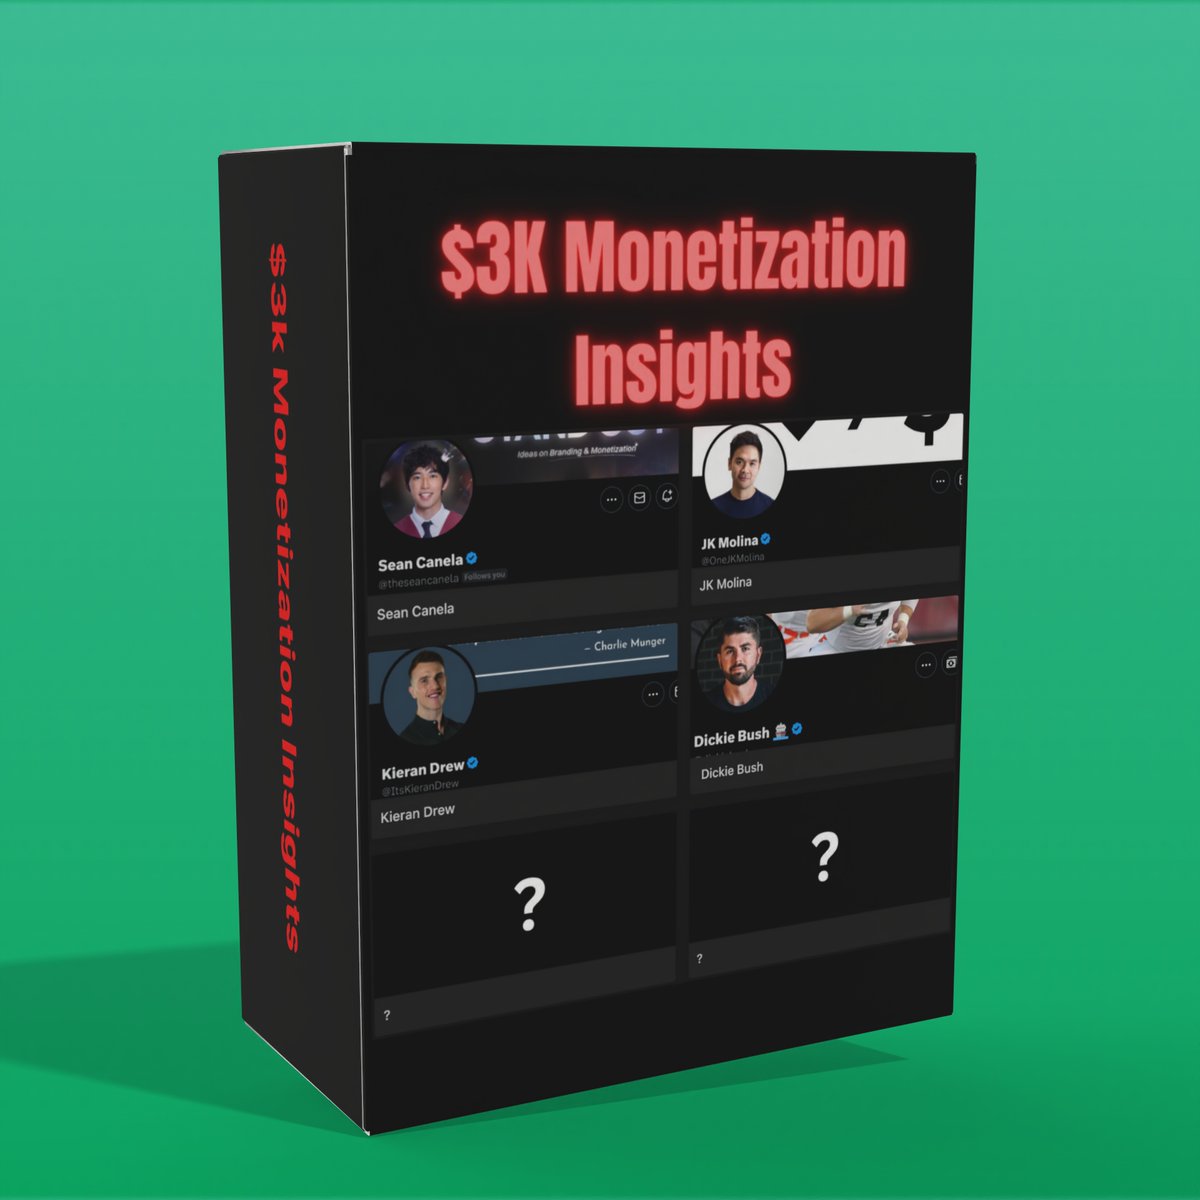 6 creators.
Millions of $$$ made.

All from X.

I paid $3,000 for their mentorship & courses

To get exclusive insights into their strategies

Want it for FREE?

1. Like + Comment your fav color
2. Follow me so I can send it
3. RT to receive 2 BONUS 7-figure creators